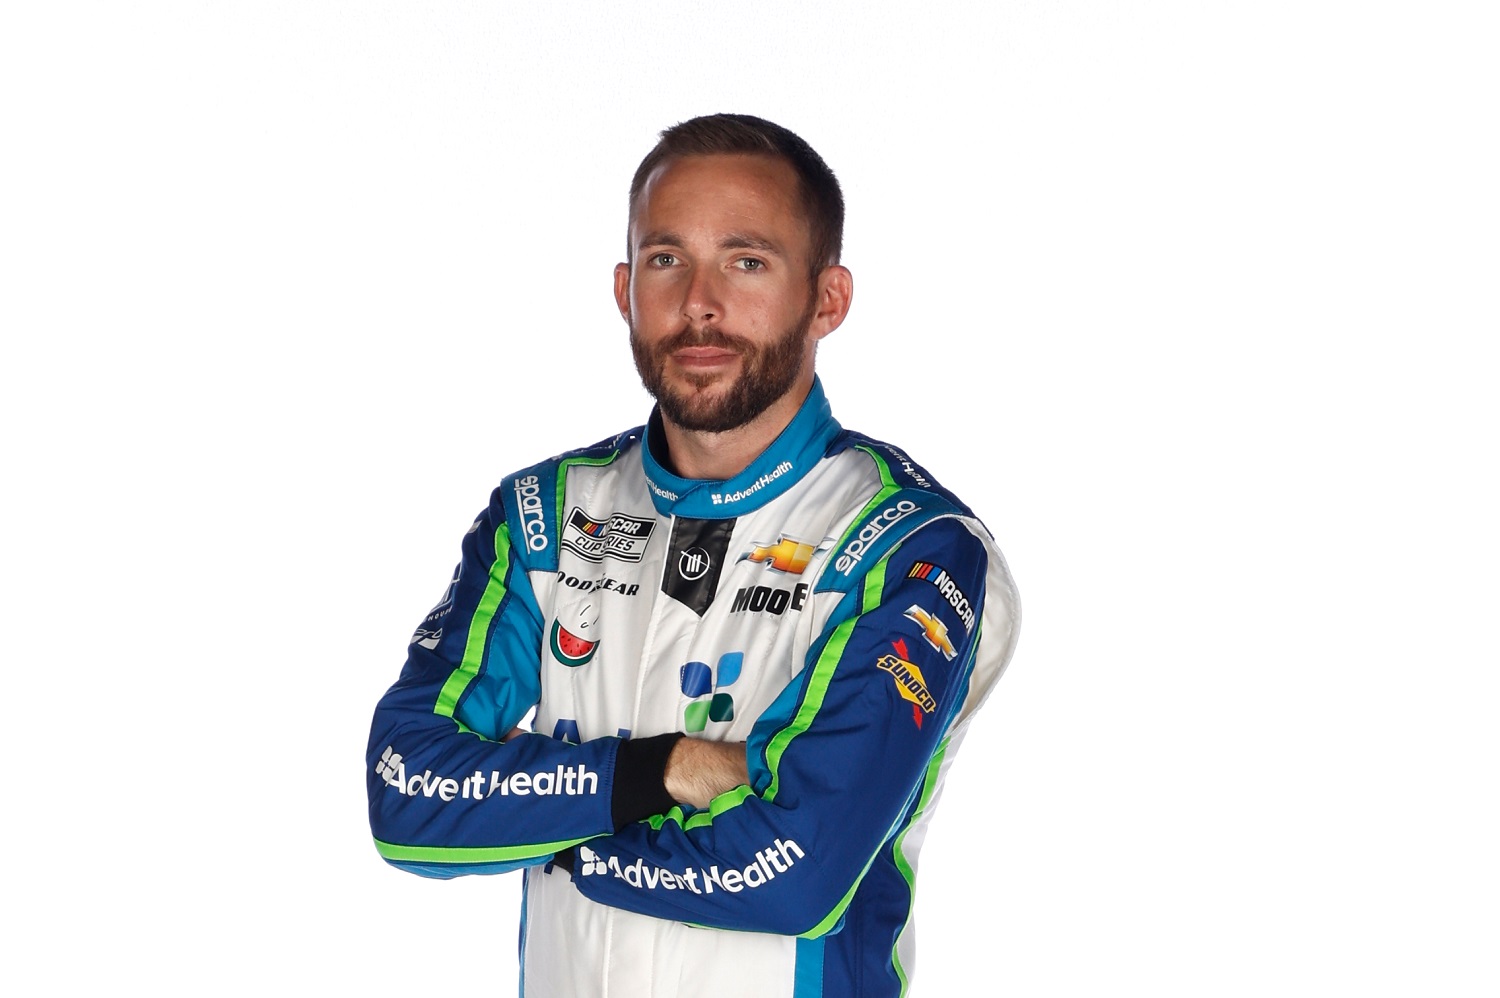 Ross Chastain poses for a photo during NASCAR Production Days at Clutch Studios on Jan. 18, 2022, in Concord, North Carolina.